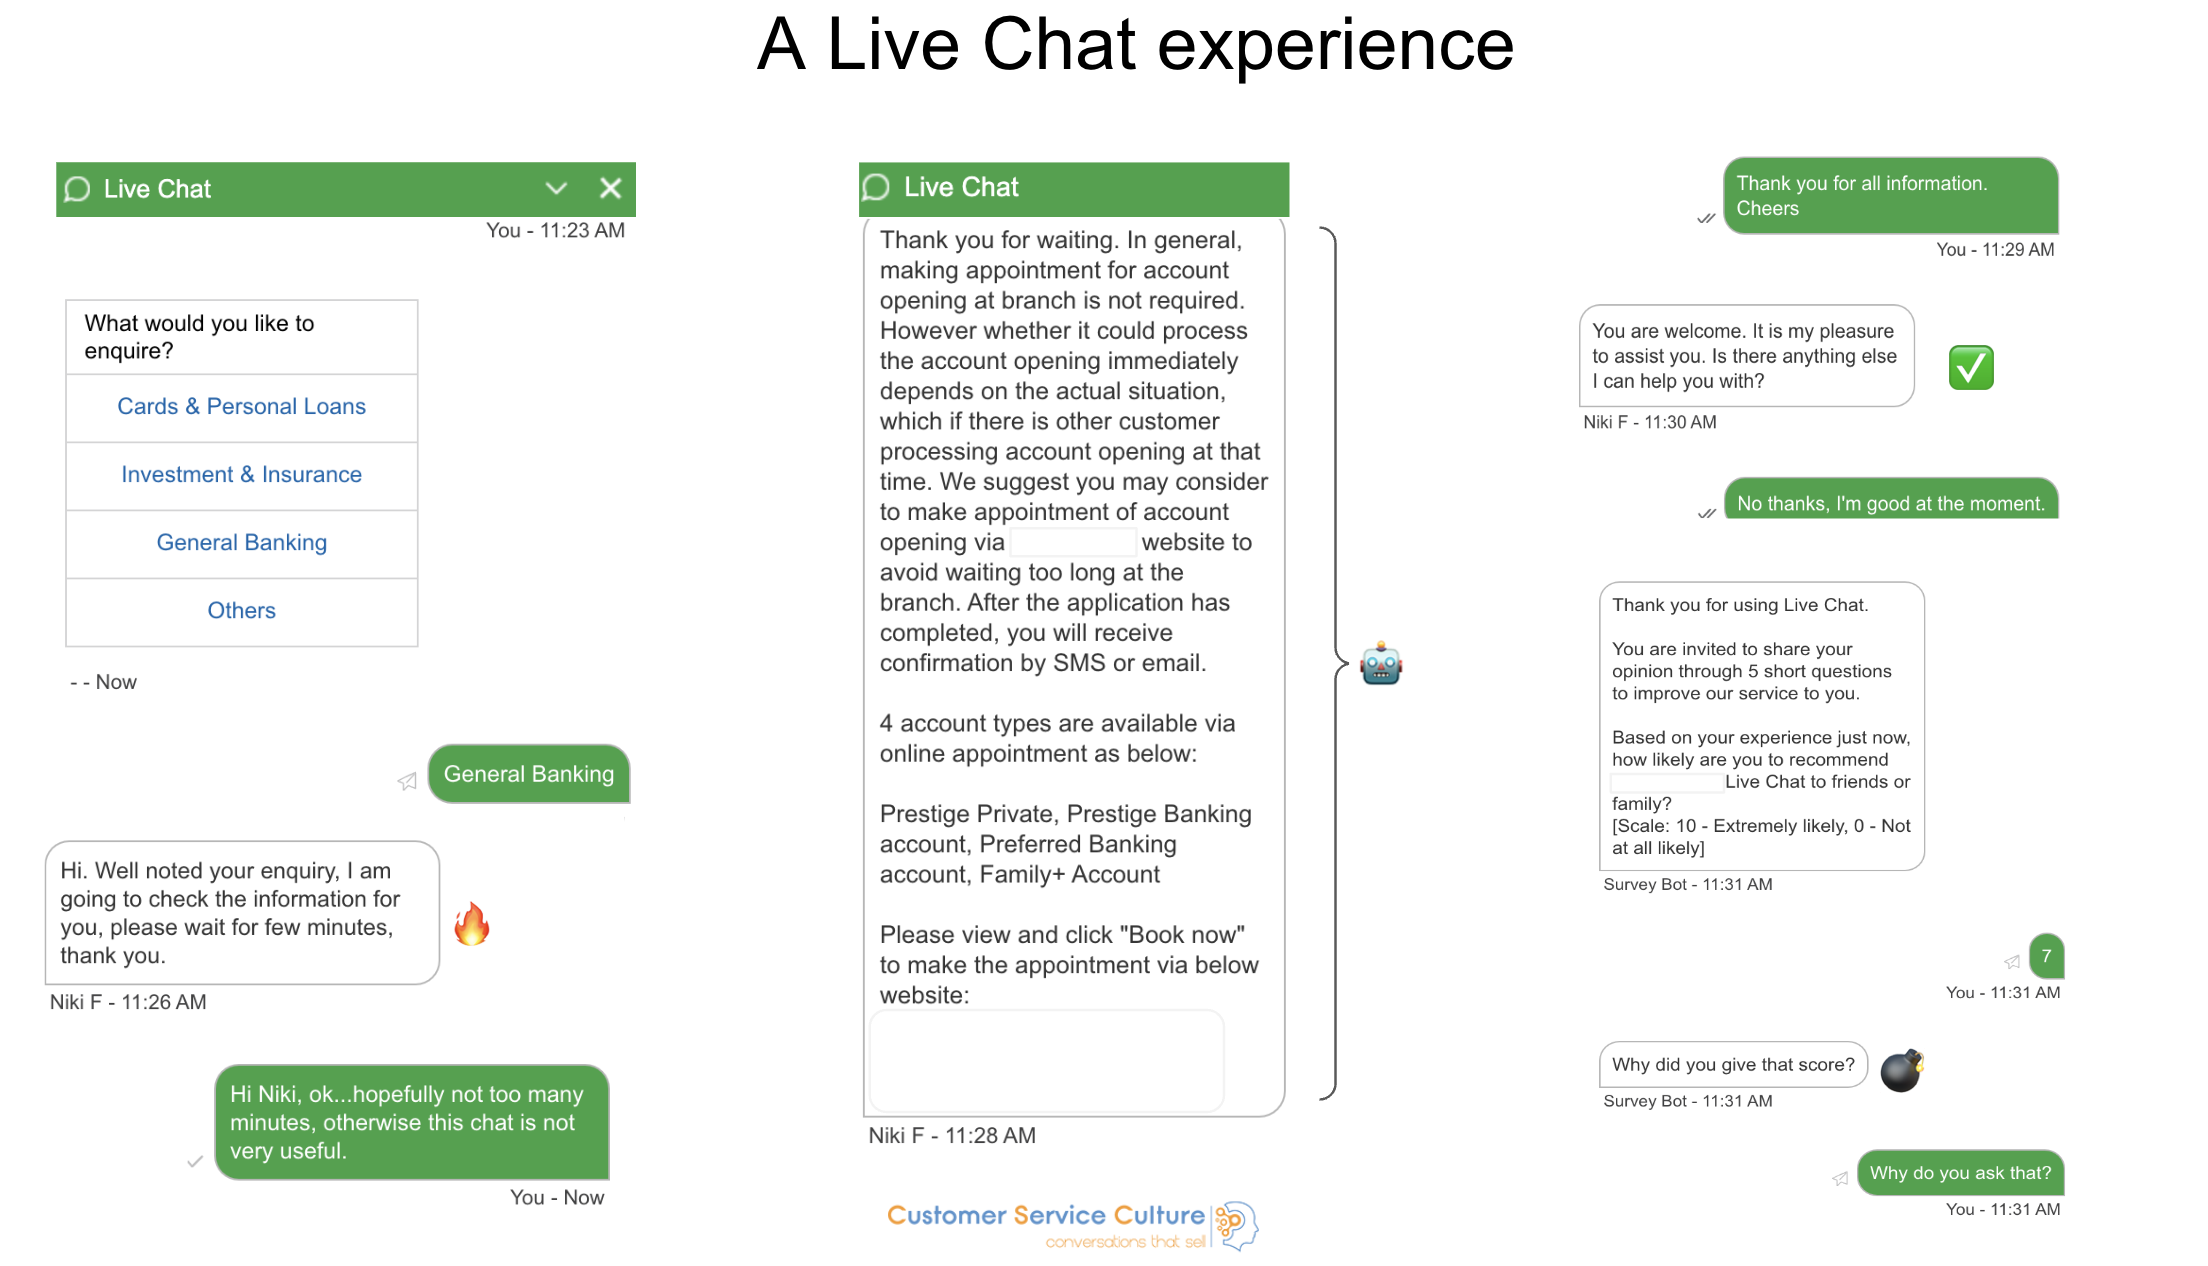 A live chat experience